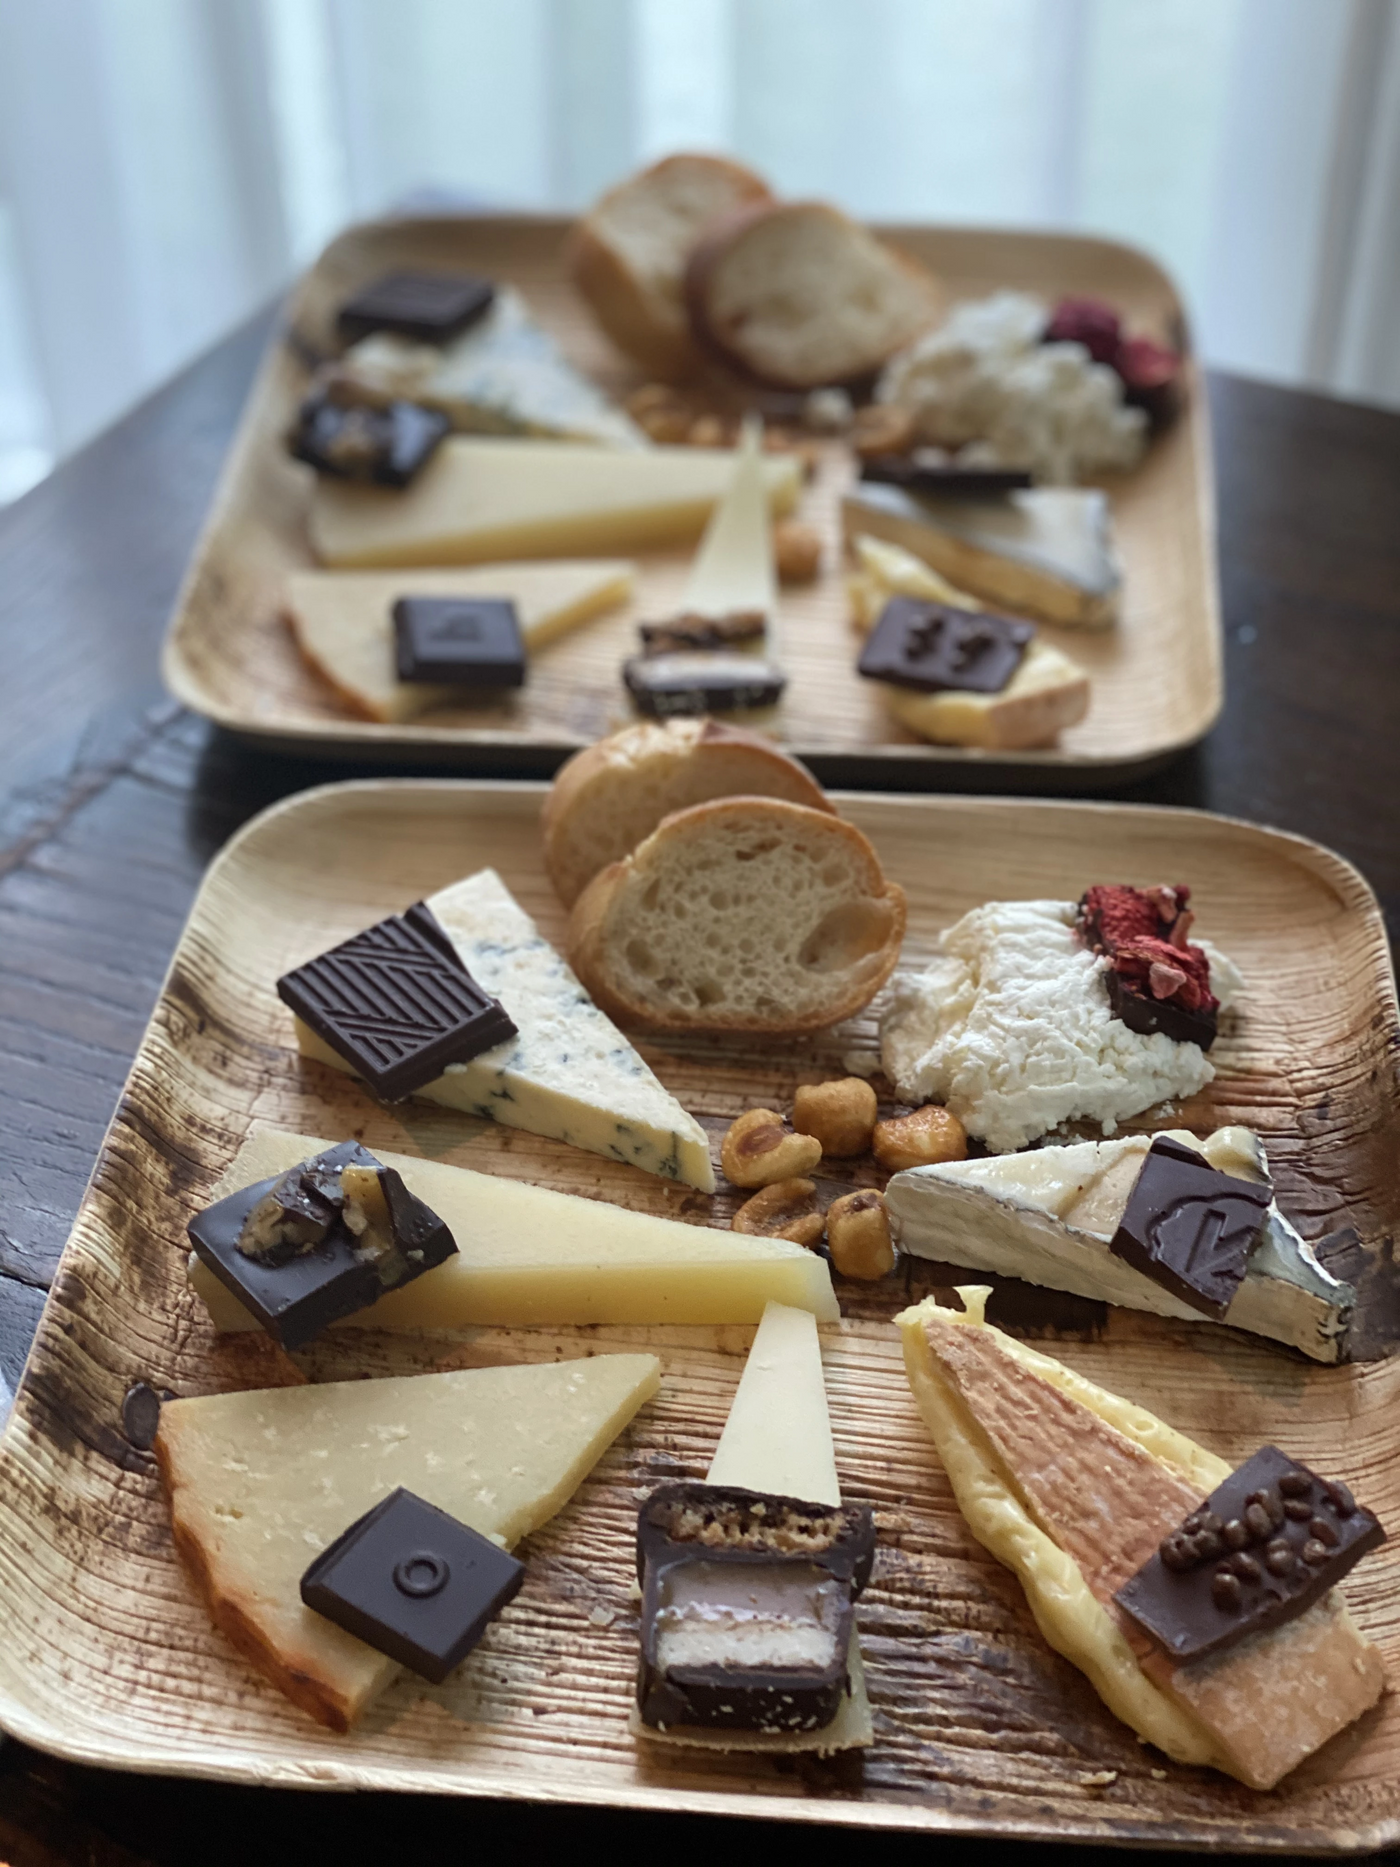 Cheese and Chocolate Tasting (South Lamar)